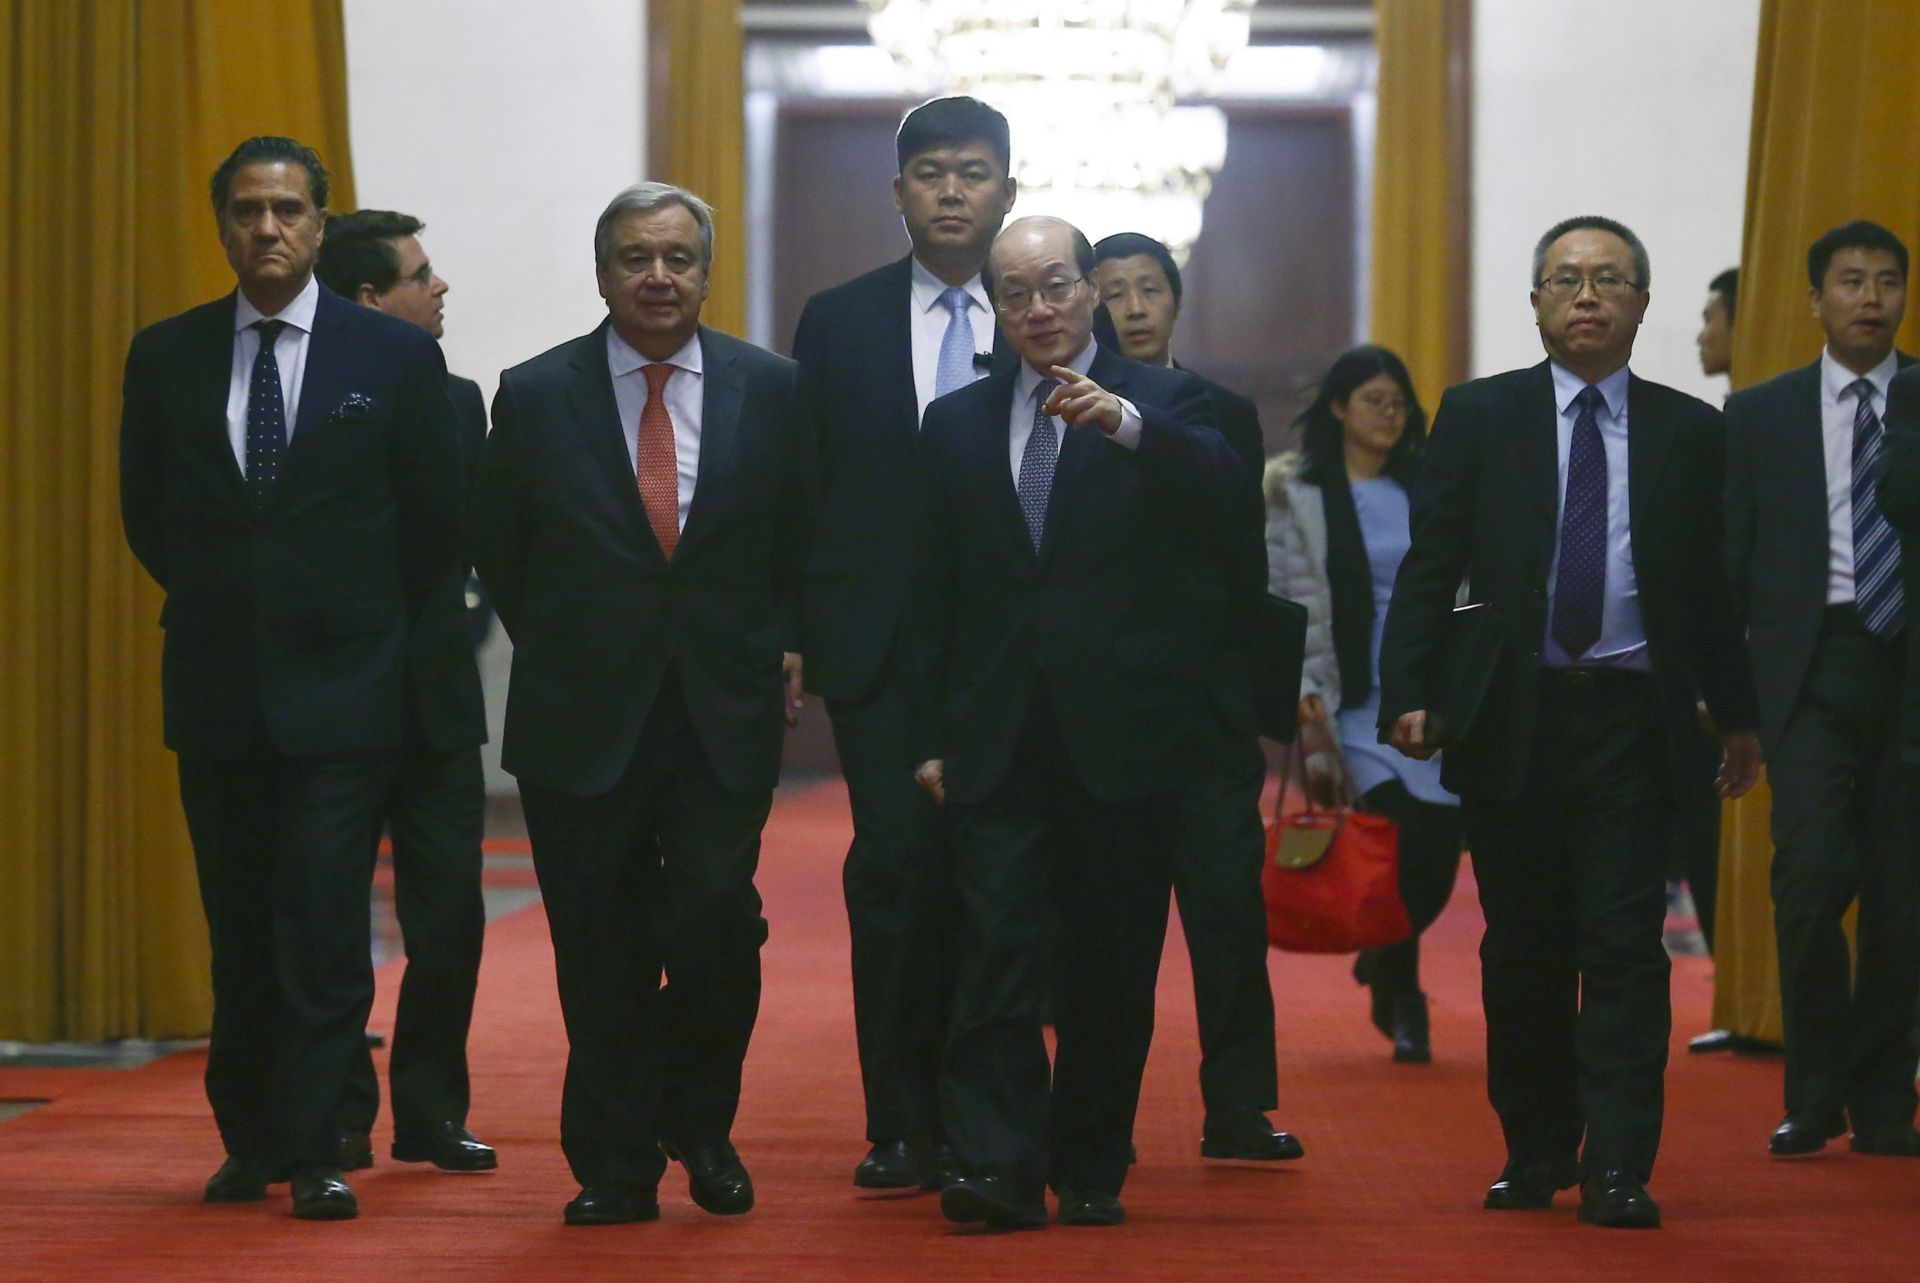 epa05650536 U.N. Secretary-General-designate Antonio Guterres (2-L) arrives at the Great Hall of the People for a meeting with Chinese officials in Beijing, China, 28 November 2016.  EPA/THOMAS PETER/POOL